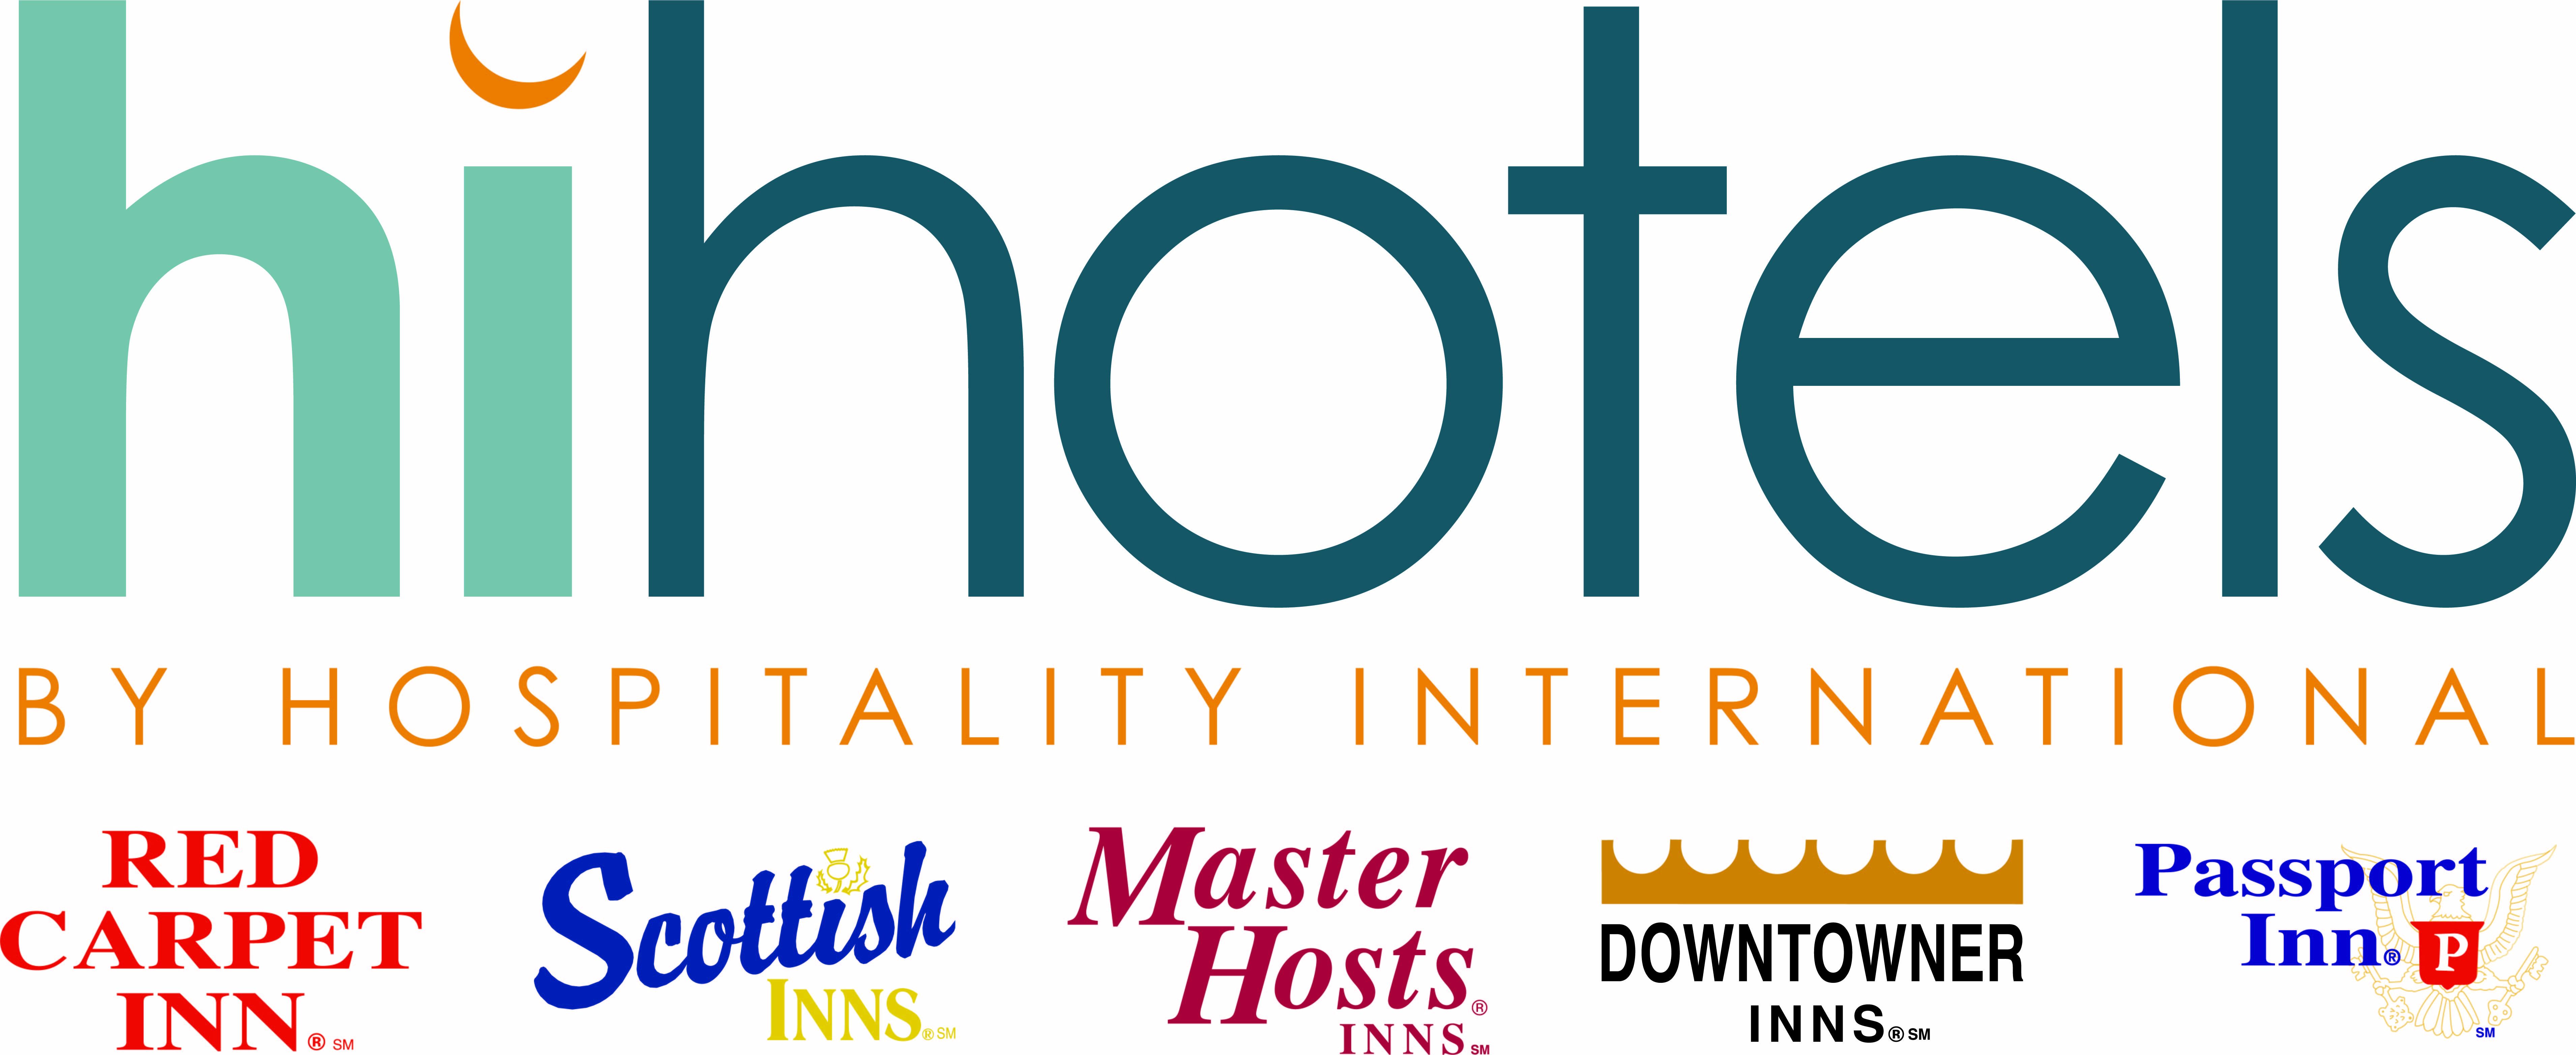 hihotels by Hospitality International Convention 2021 - Growing Through Partnership